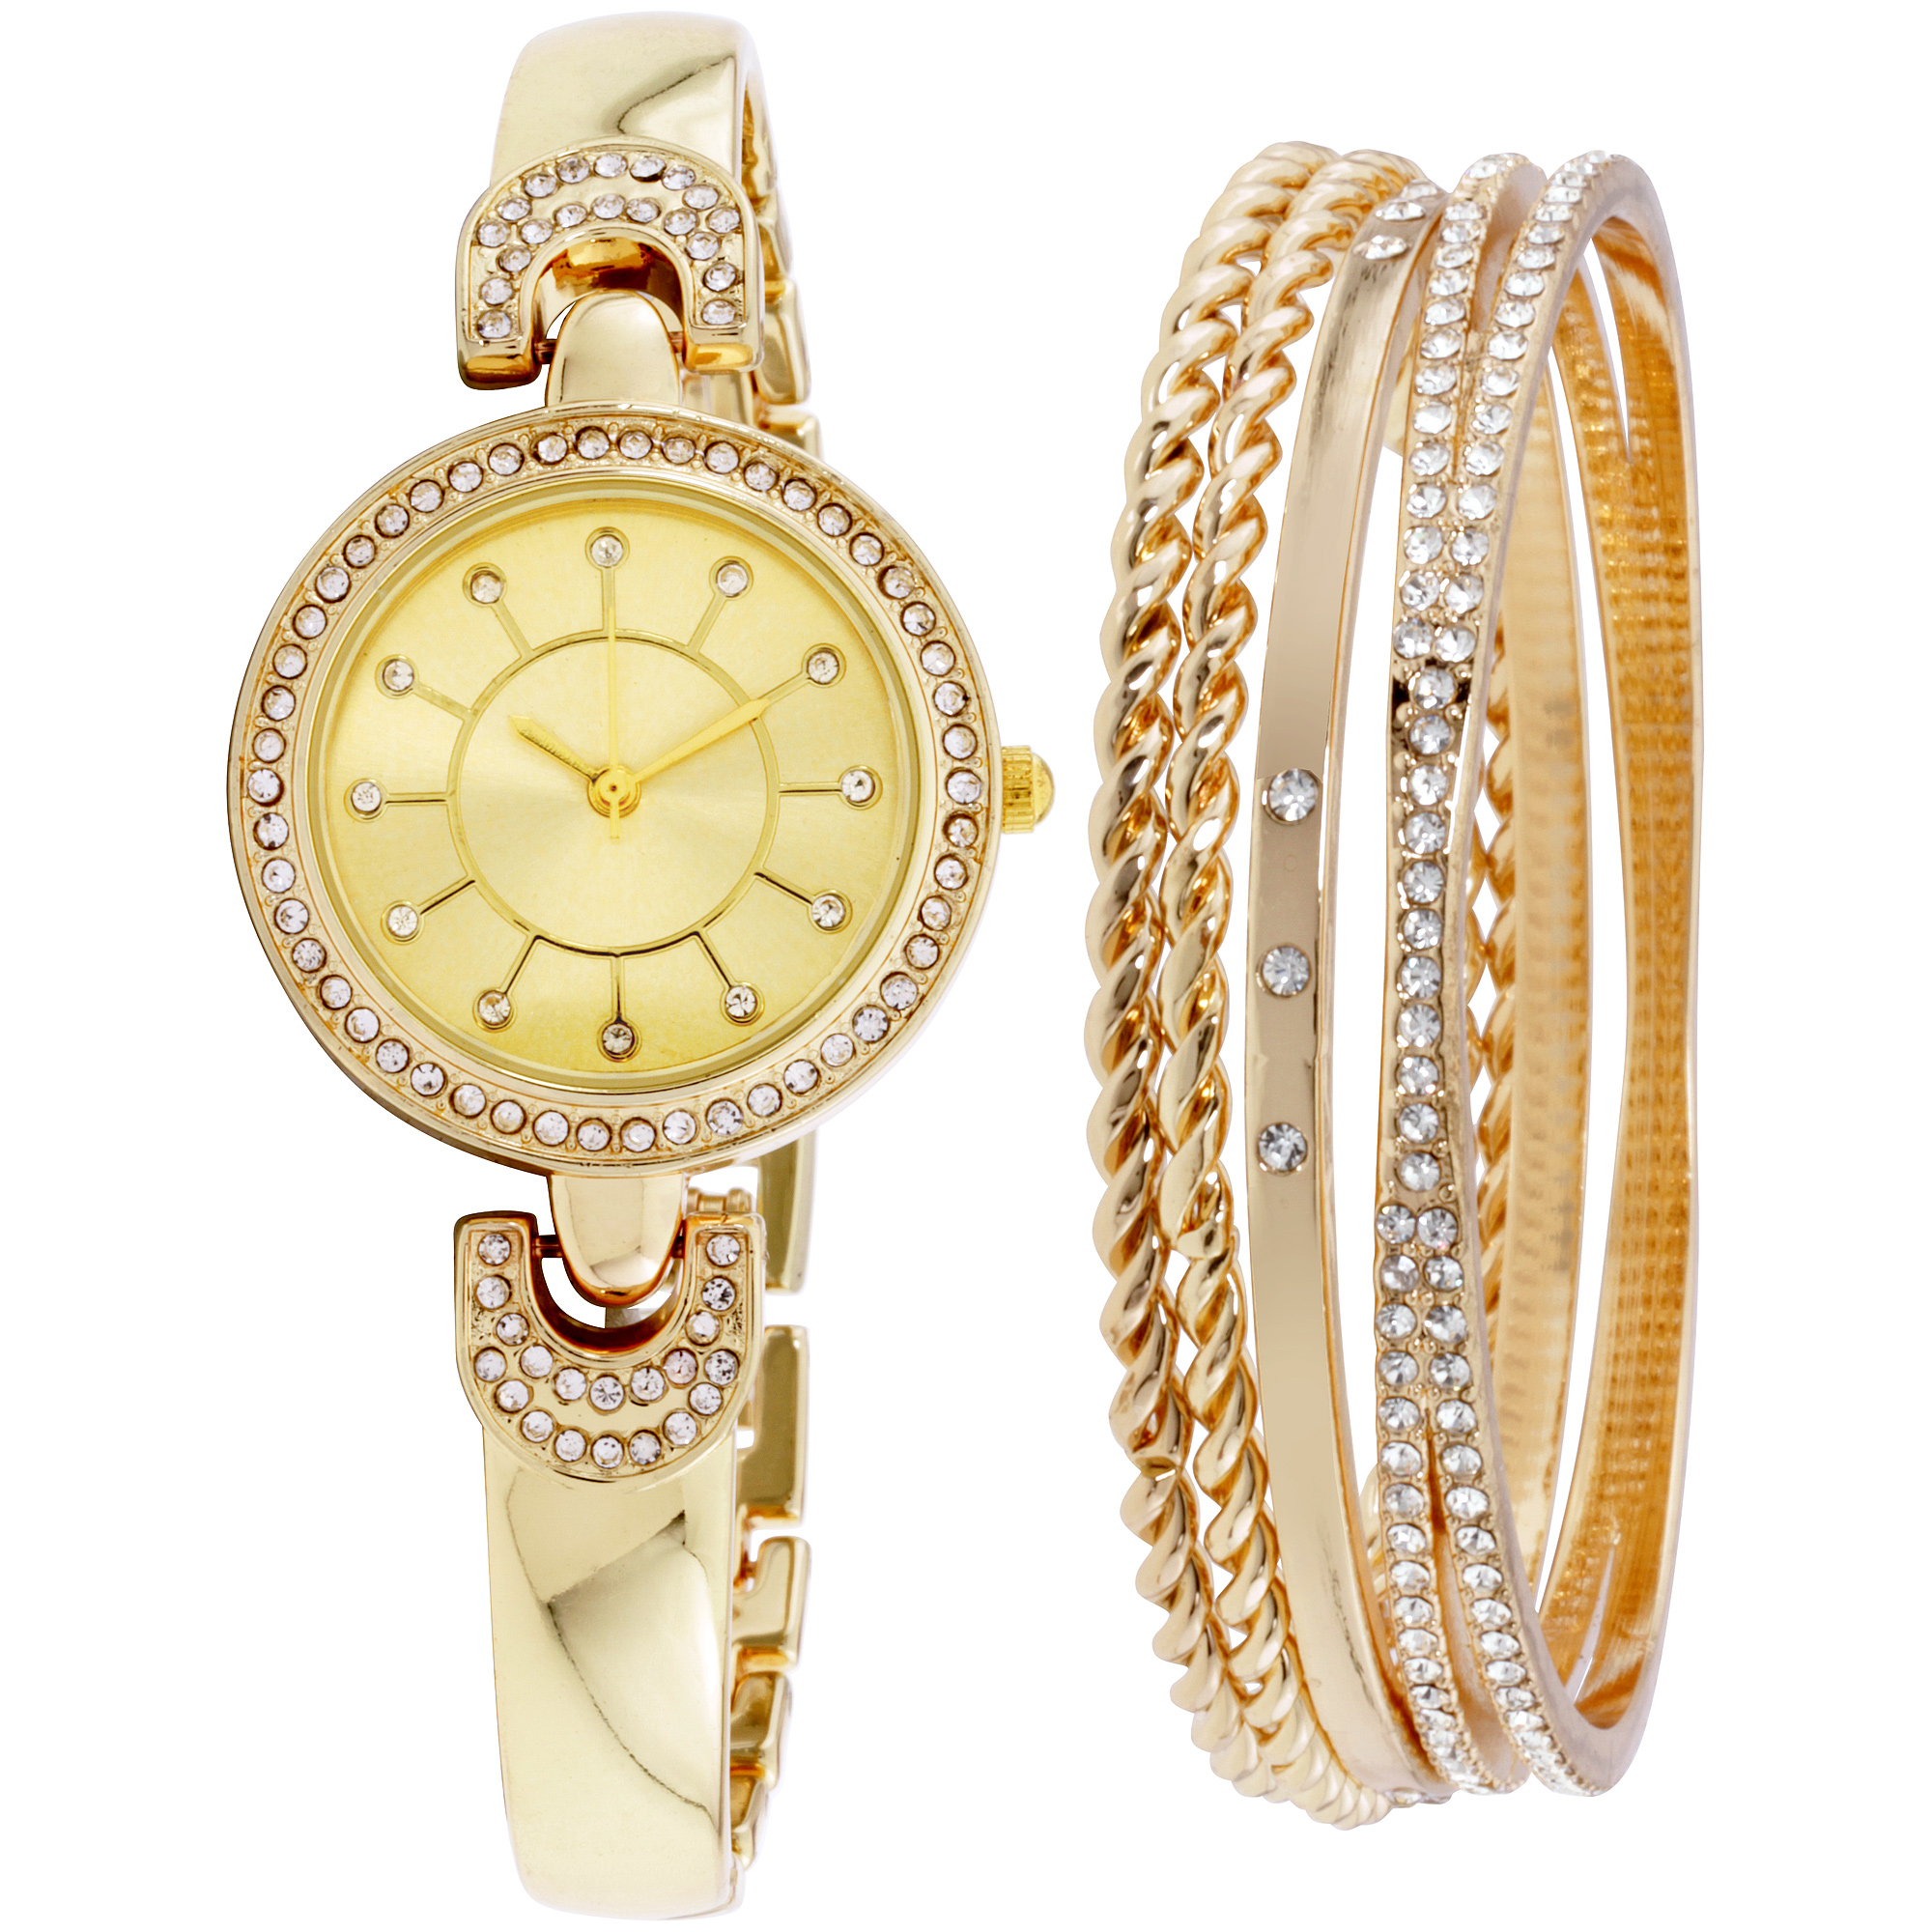 Jaclyn Smith Ladies Gold Tone Watch and Bracelet Set